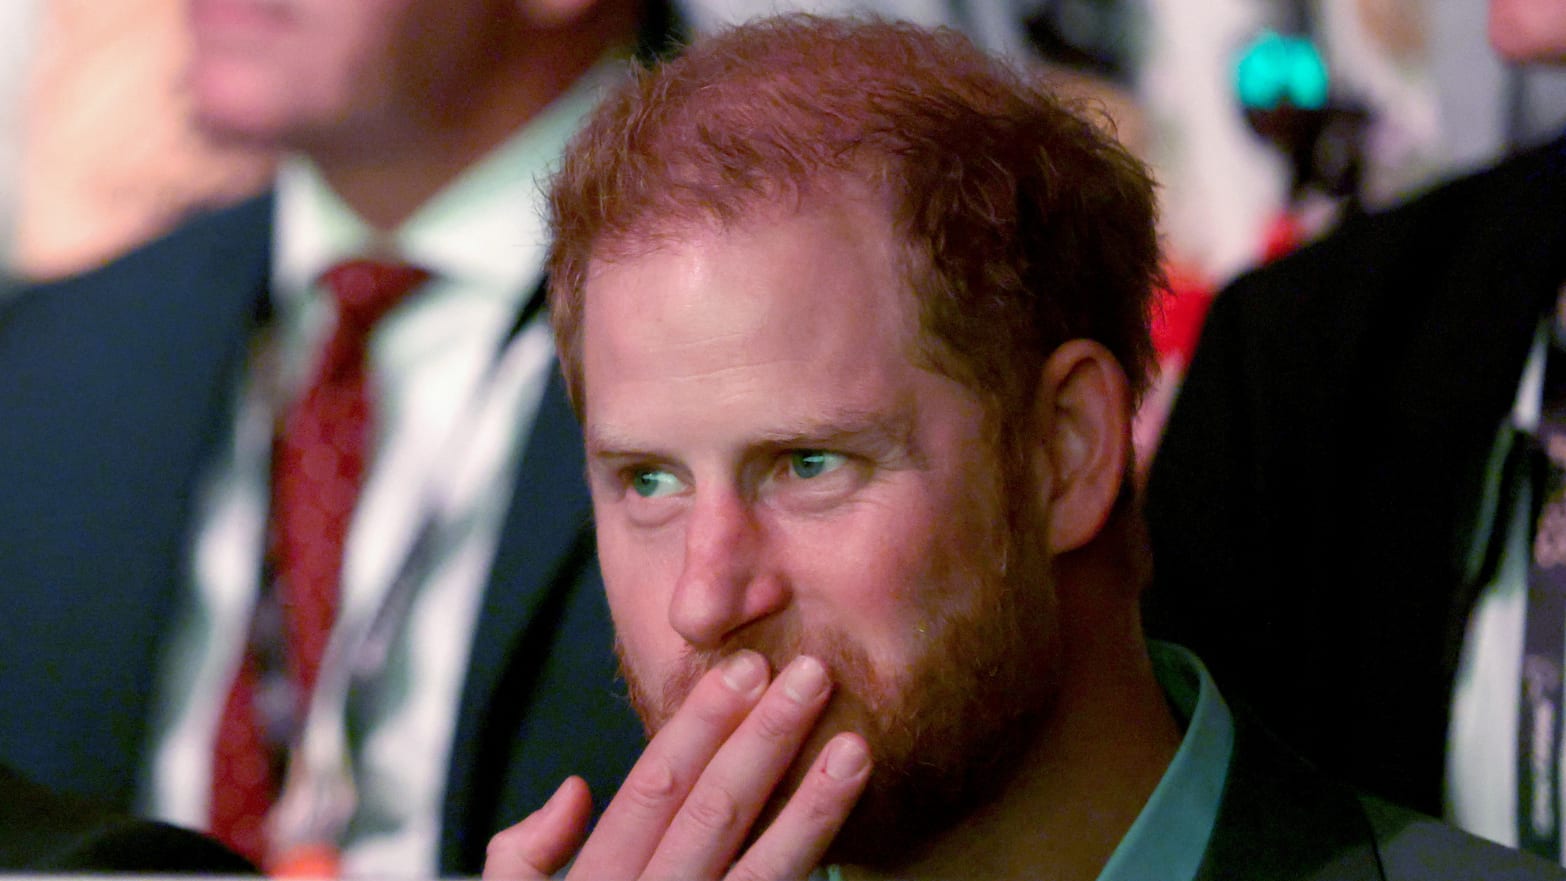 Prince Harry at the opening ceremony of the Invictus Games